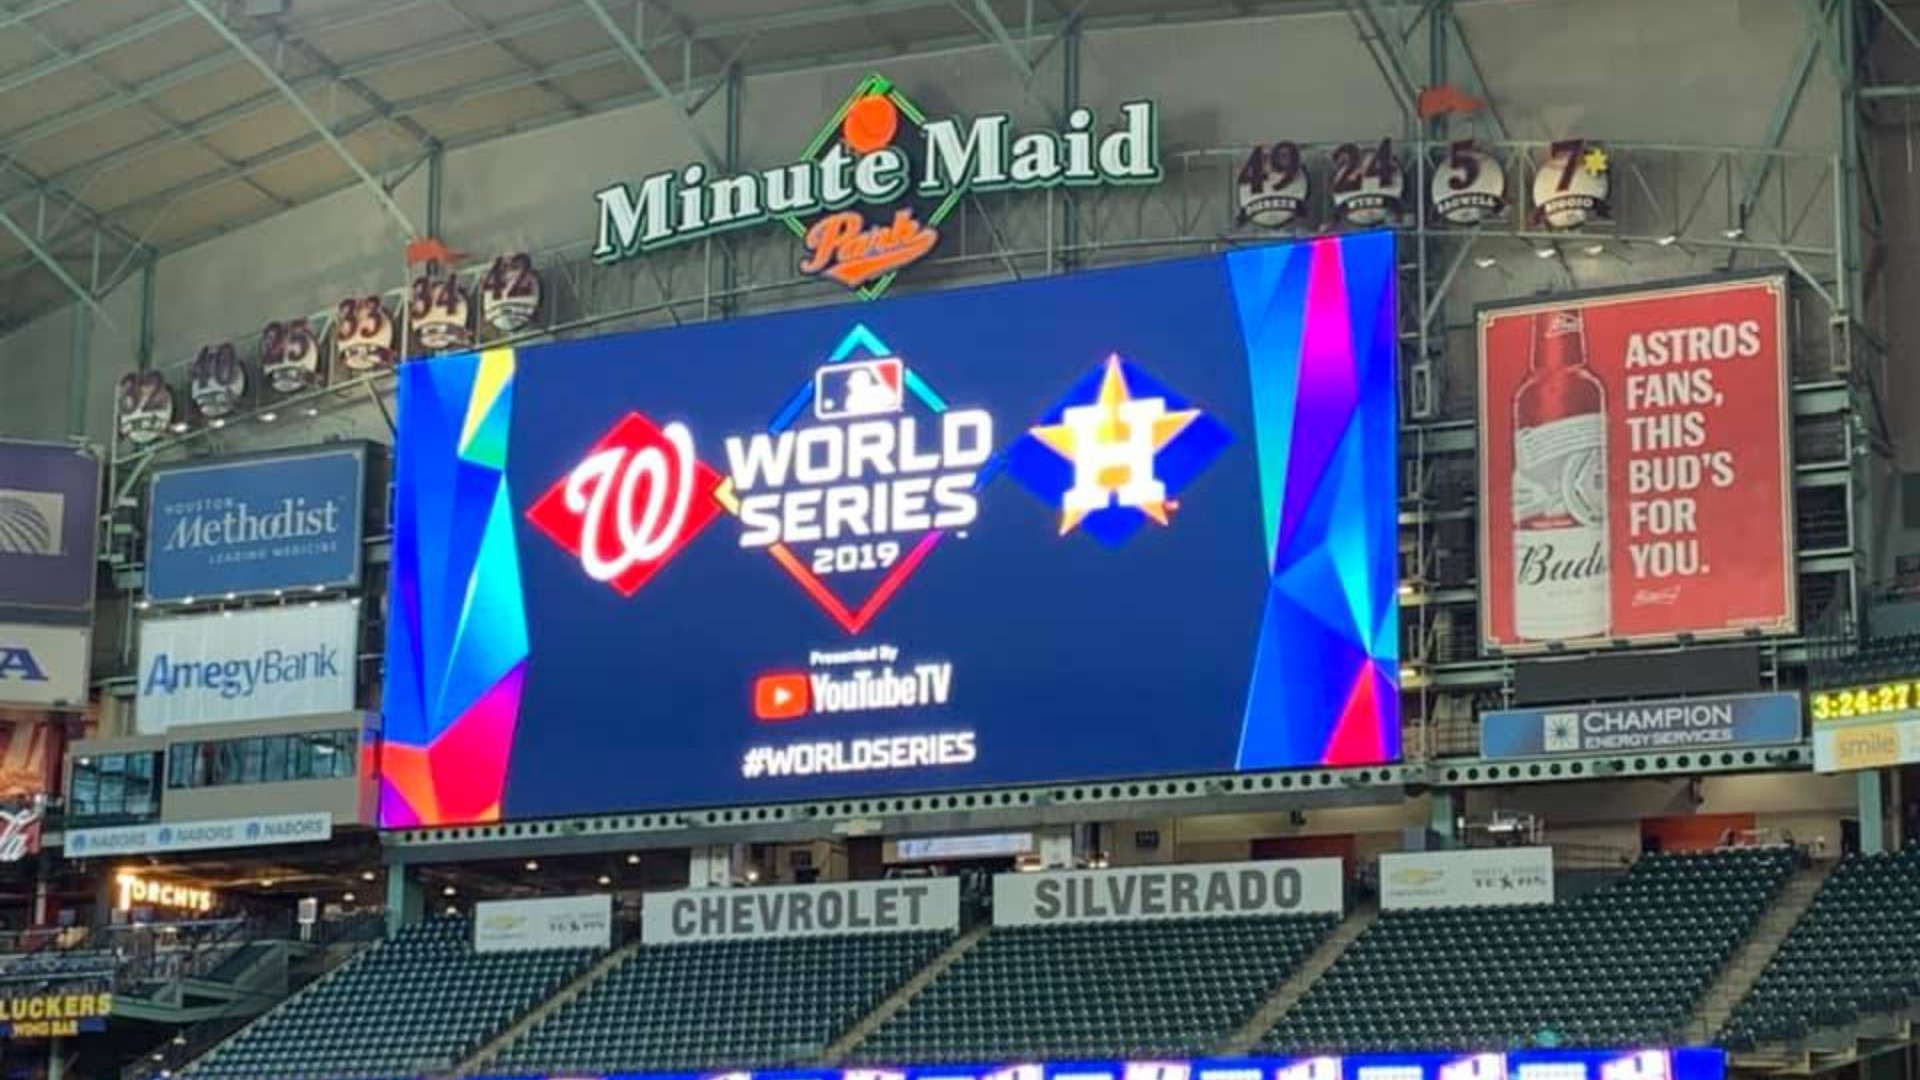 What to watch for in World Series Game 2 at Minute Maid Park